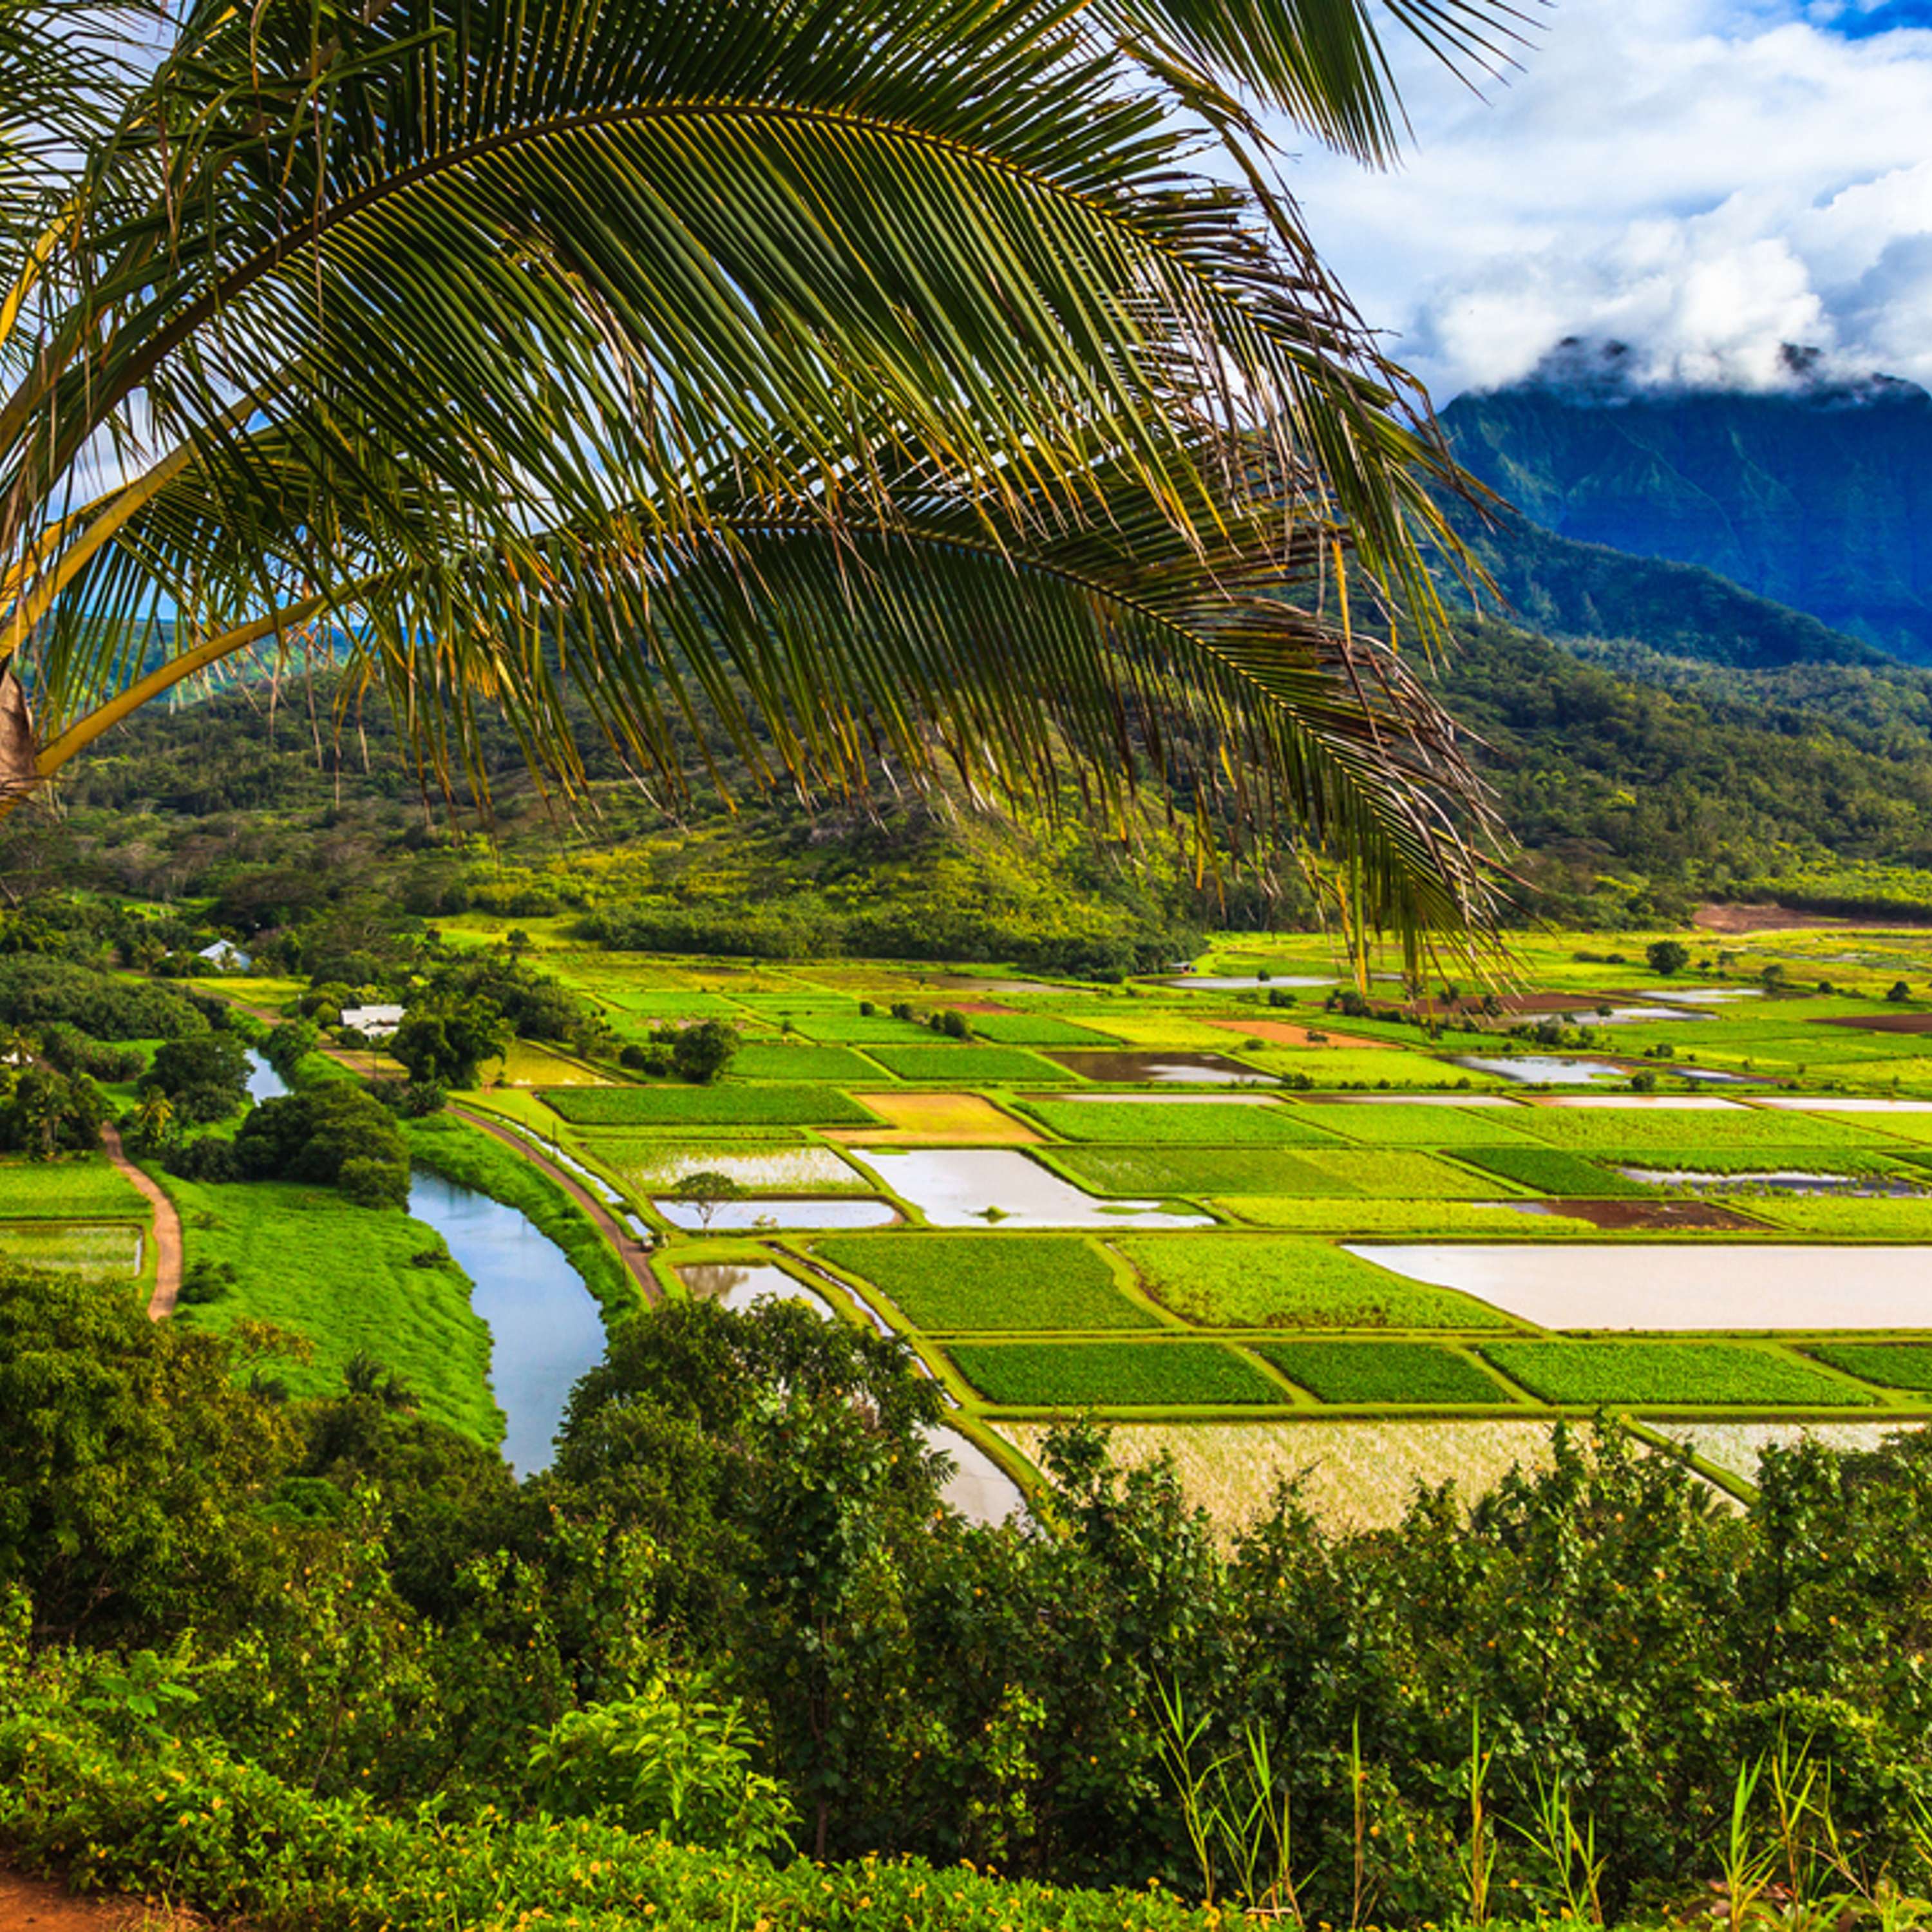 65 | Kauai for Families: Everything You Need to Know About Hawaii’s ”Garden Isle”